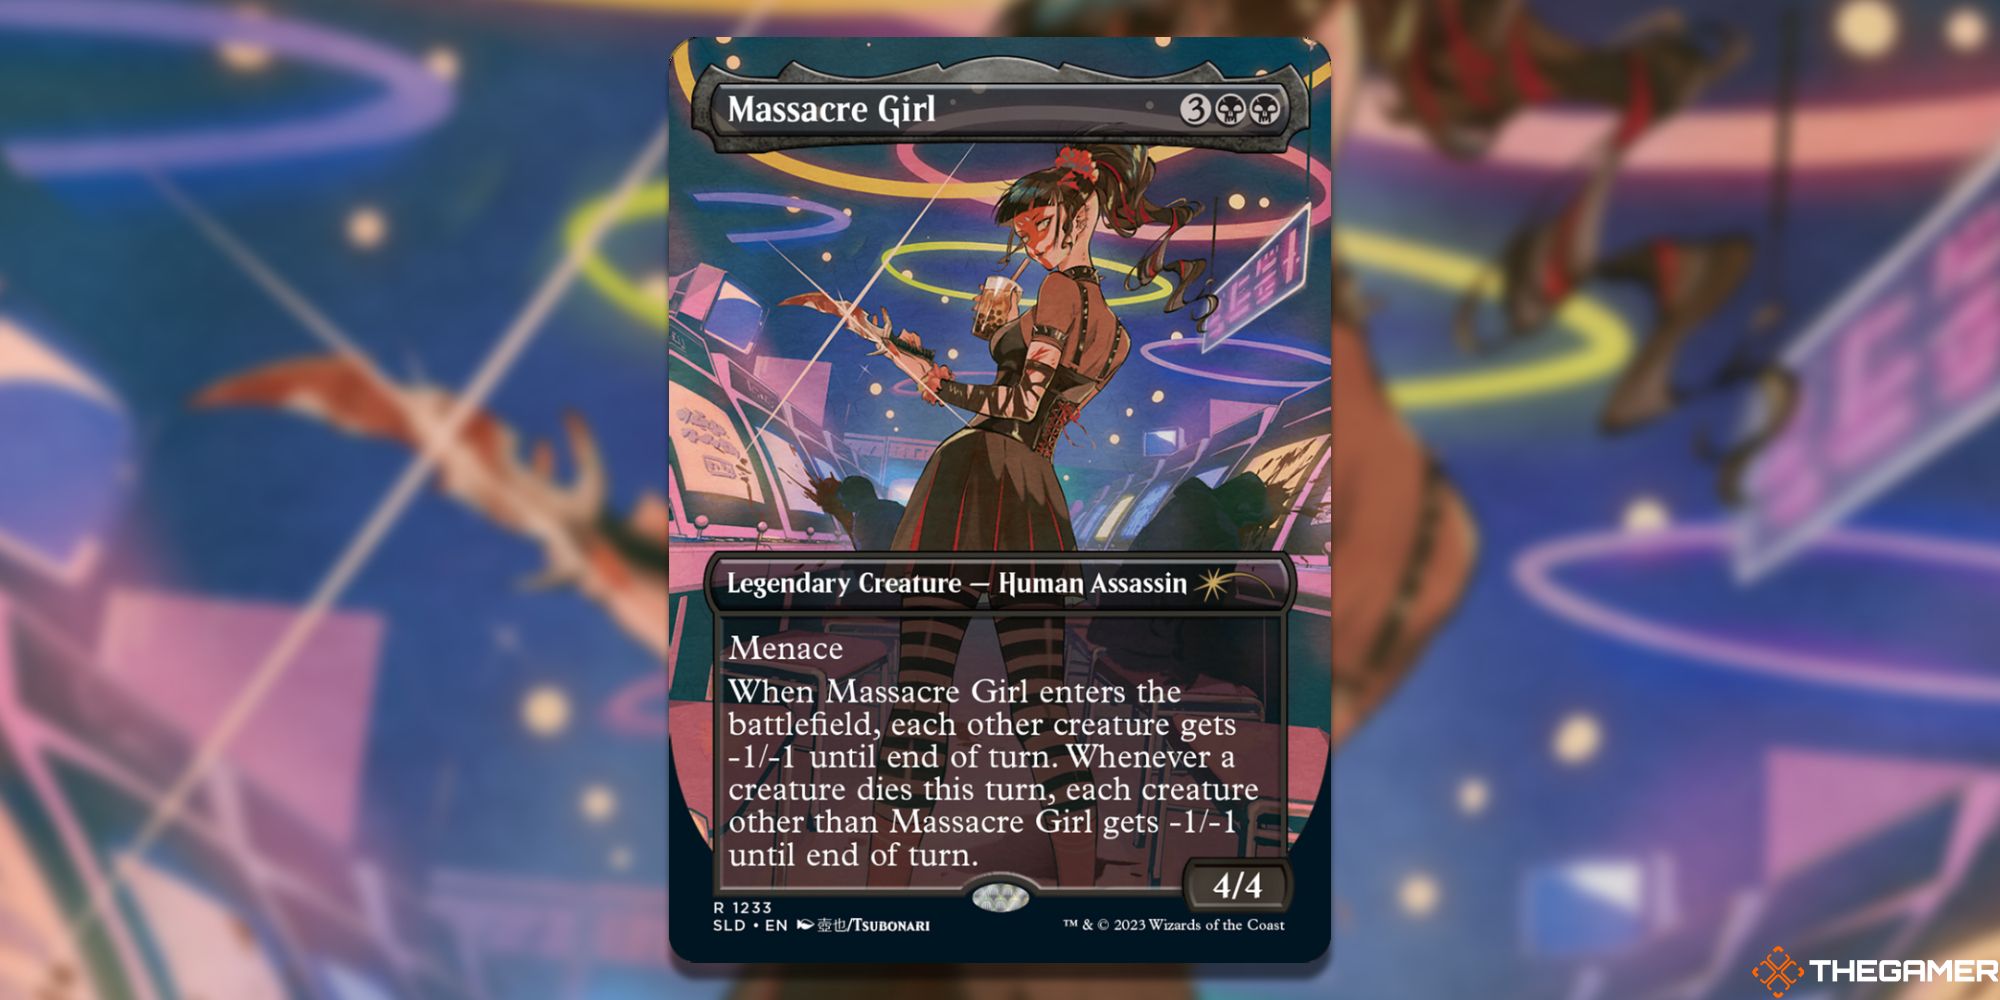 The card Massacre Girl from Magic: The Gathering.